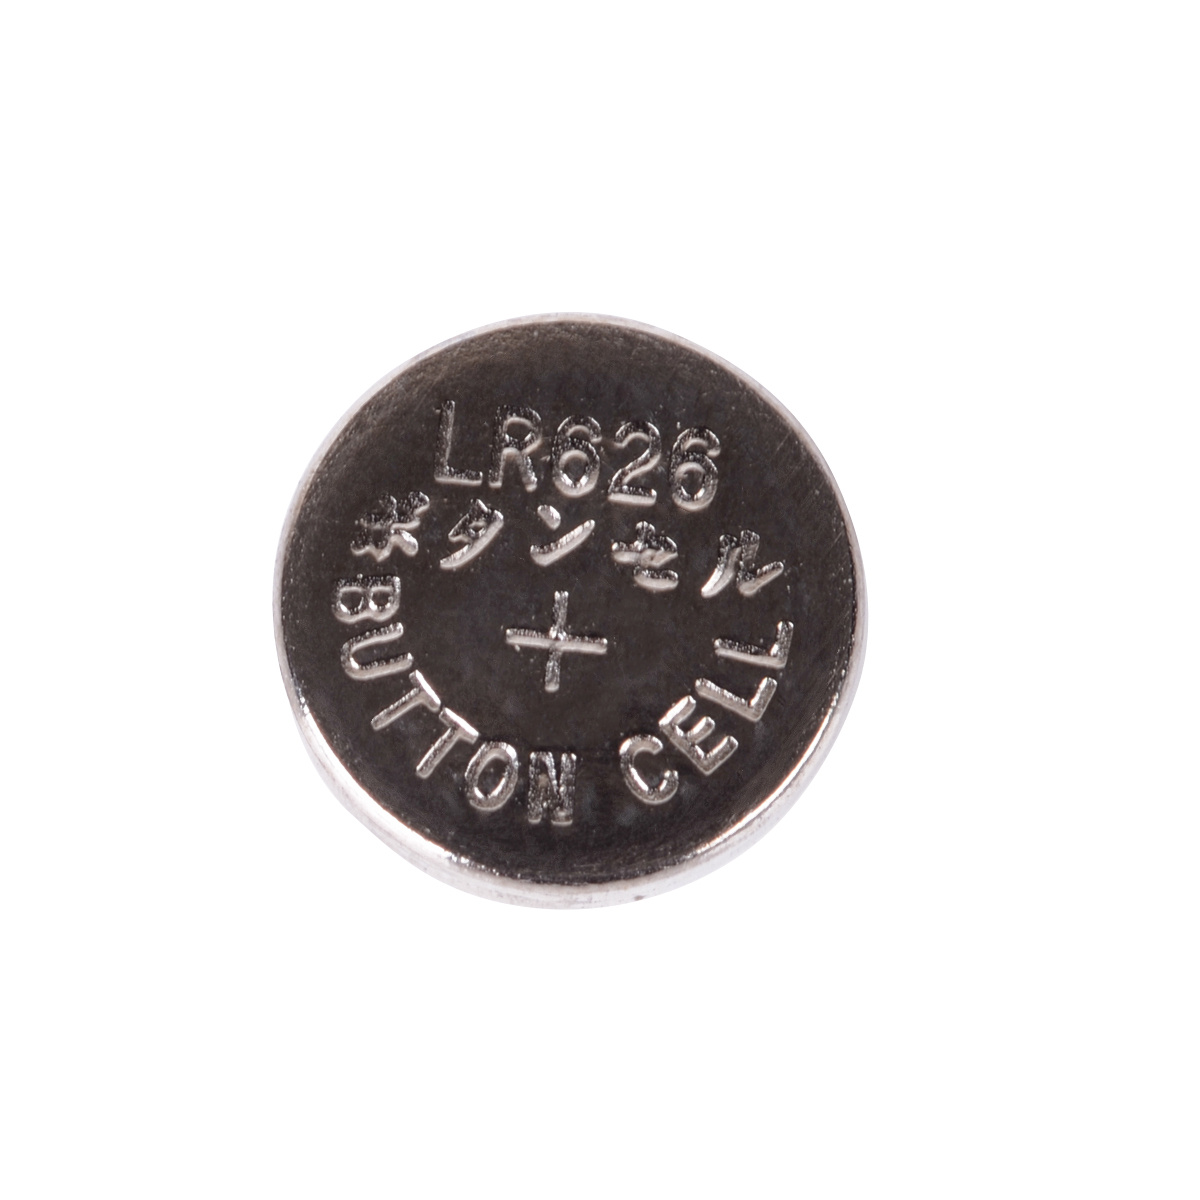 Ag4 Button Watches Battery 377 Lr626 1.55v Alkaline Cell - Temu